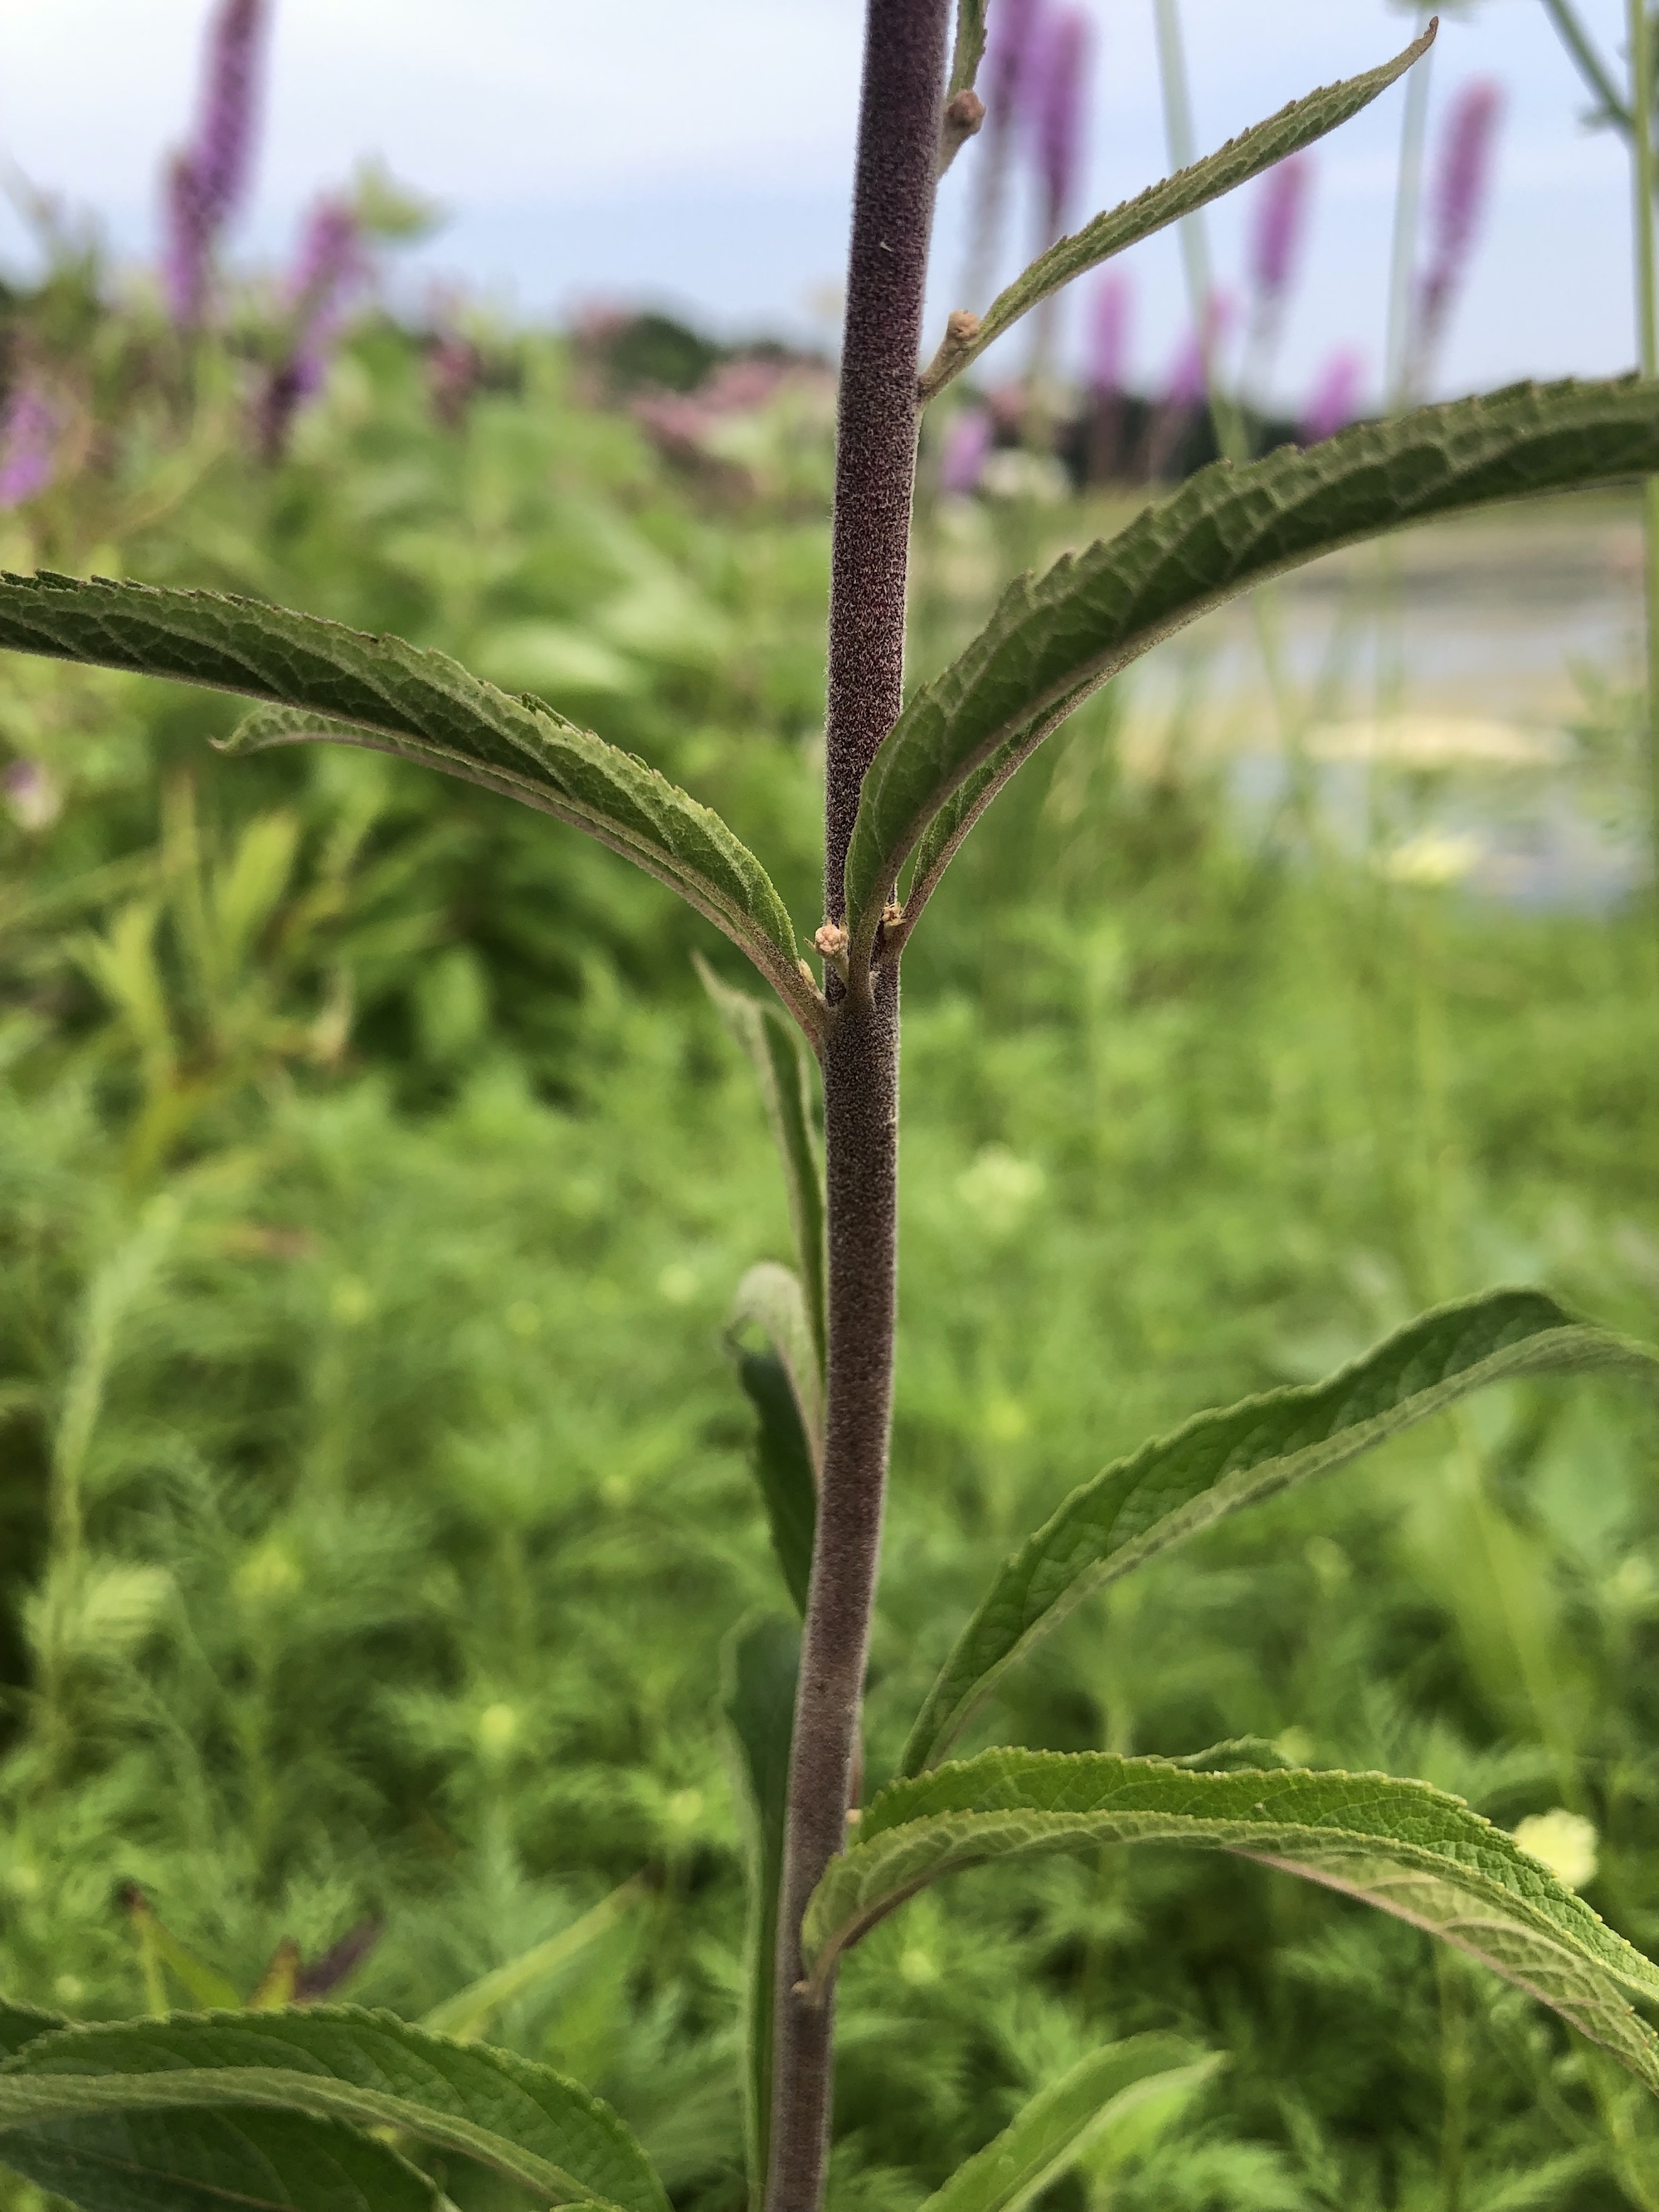 Spotted Joe-Pye Weed on shore of Vilas Park lagoon in Madison, Wisconsin on July 27, 2021.